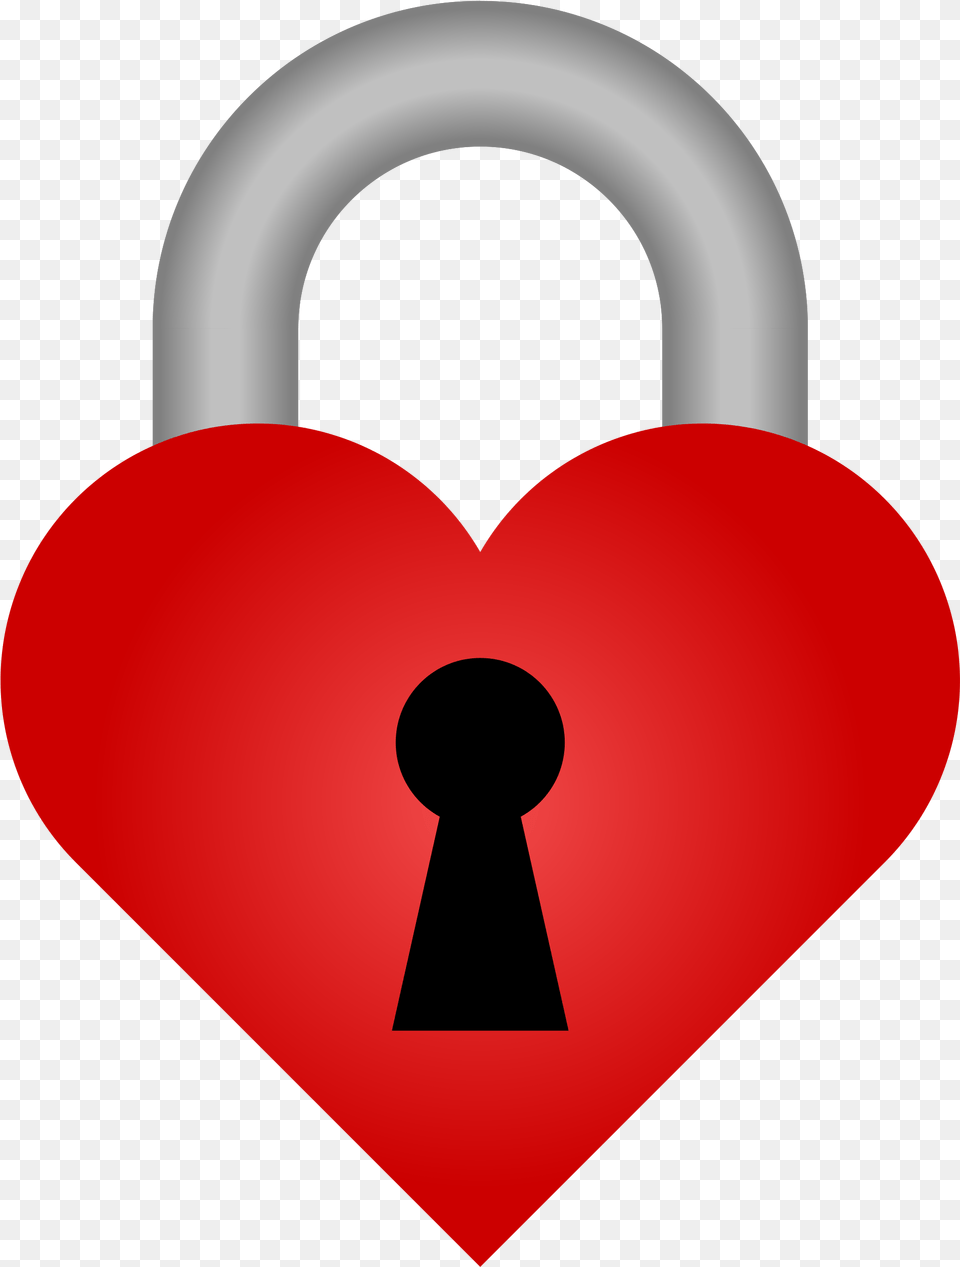 Download Graphic Heart Shaped Padlock Heart Free Png